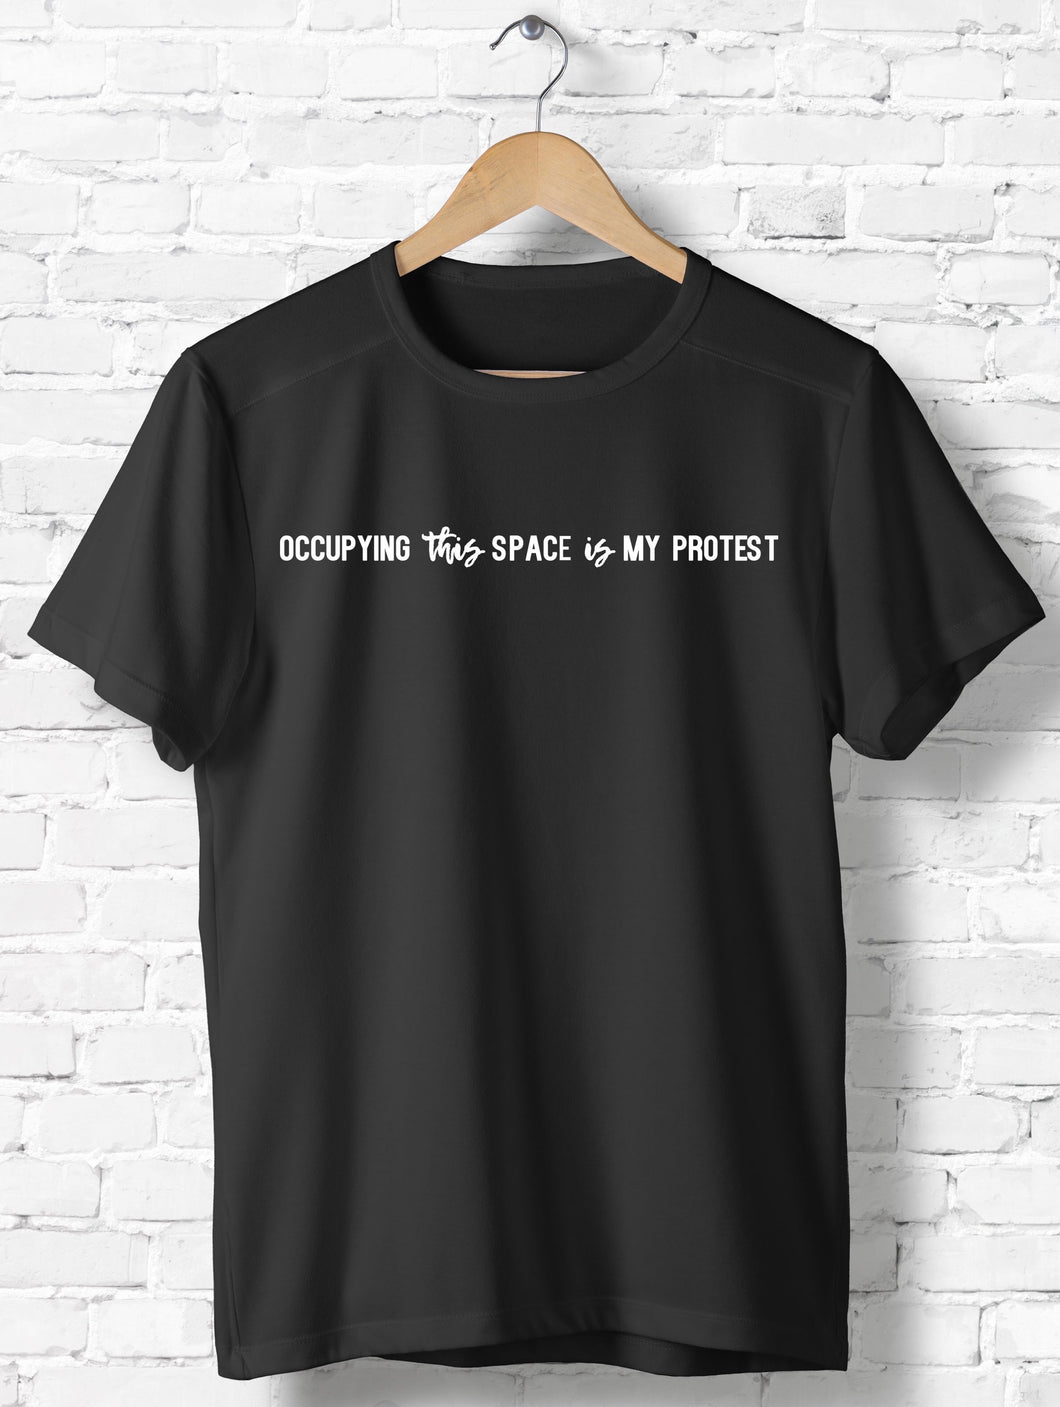 “Occupying this Space is my Protest...”